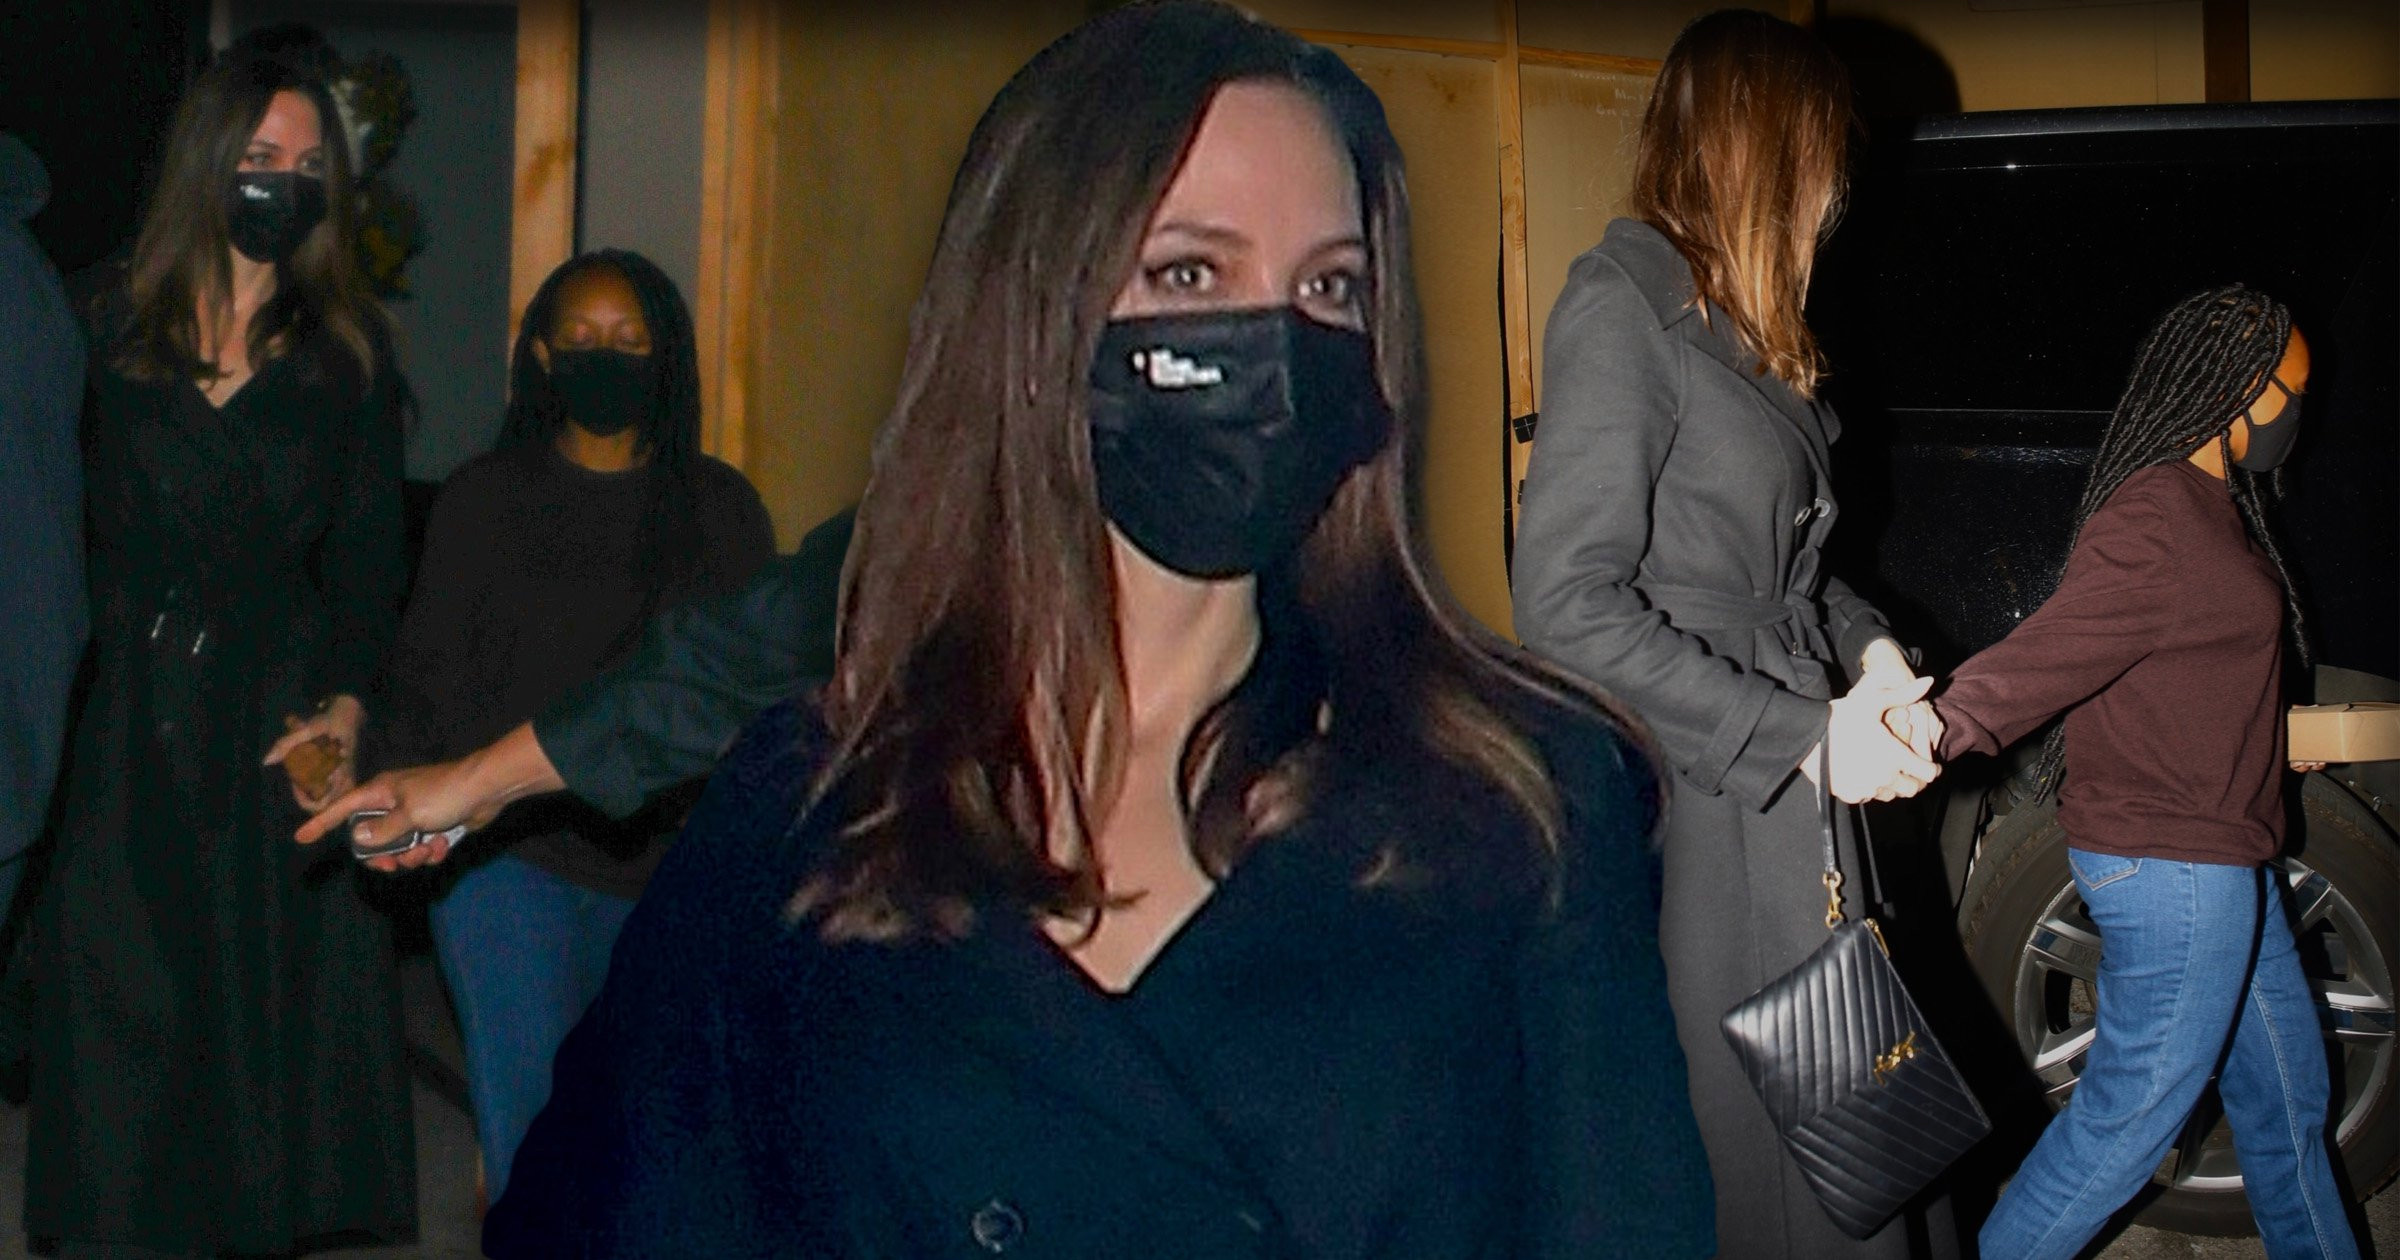 Angelina Jolie and Zahara mask up for cute mother-daughter dinner in West Hollywood